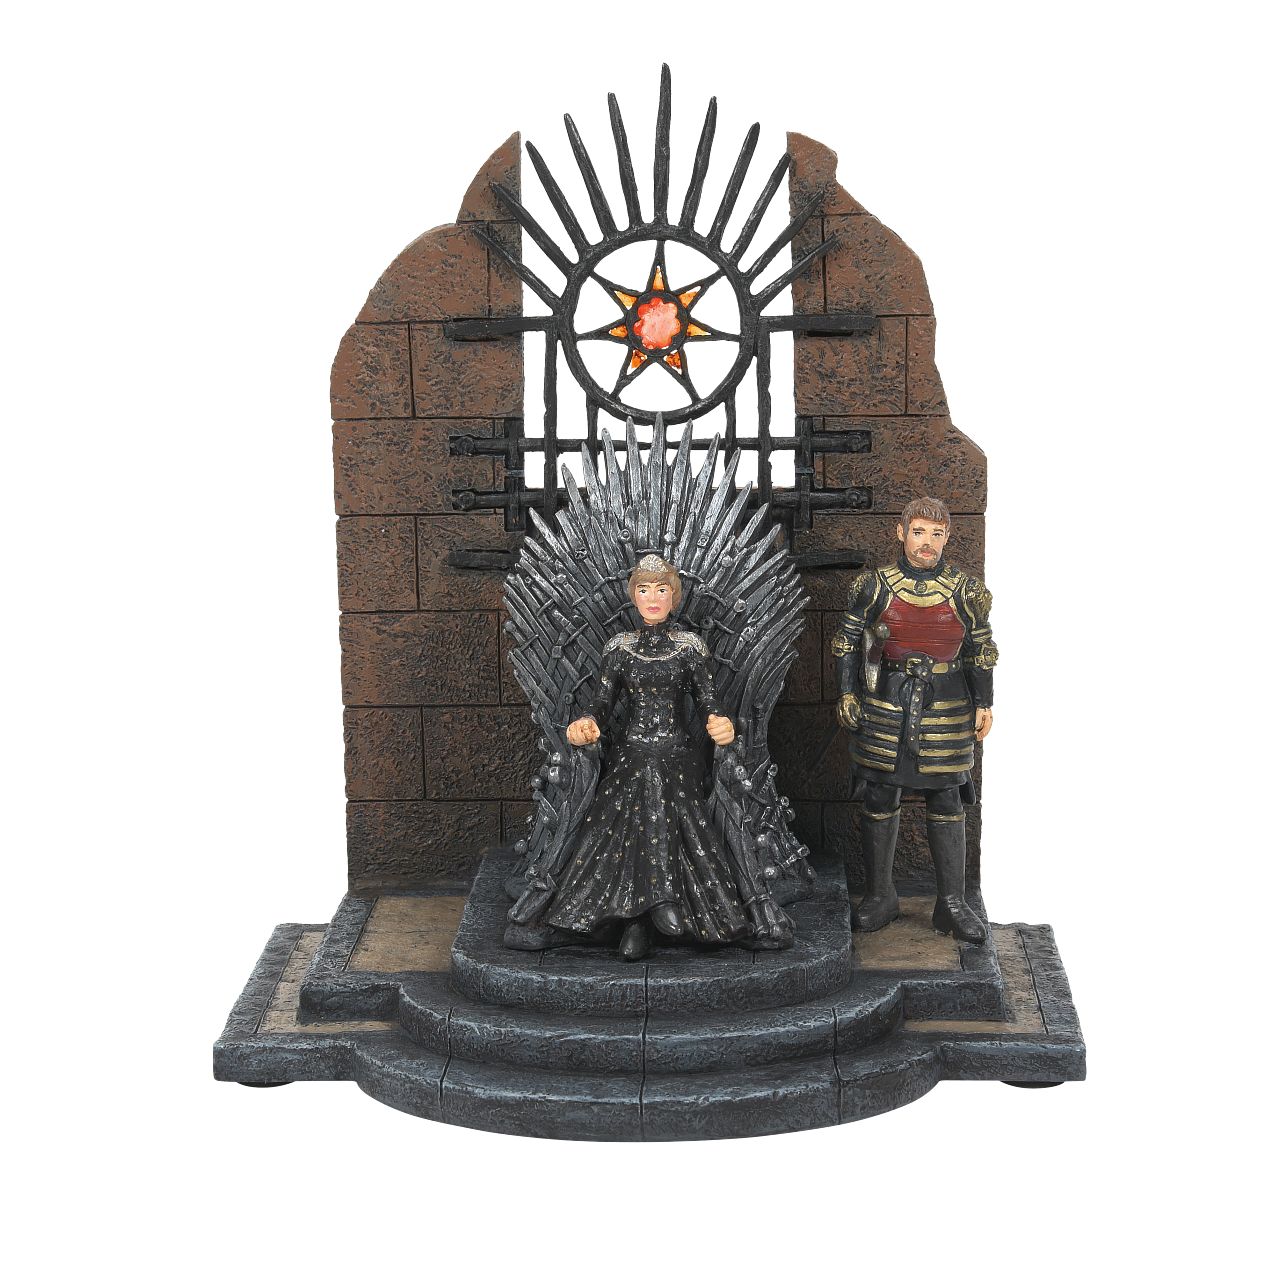 D56 Cersei and Jamie Lannister Figurine - Game of Thrones  Featuring Queen Cersei and Sir Jamie Lannister this piece has been hand crafted from the highest quality cast stone and hand painted. Each piece comes in a branded gift box. This is a decoration, not a toy.